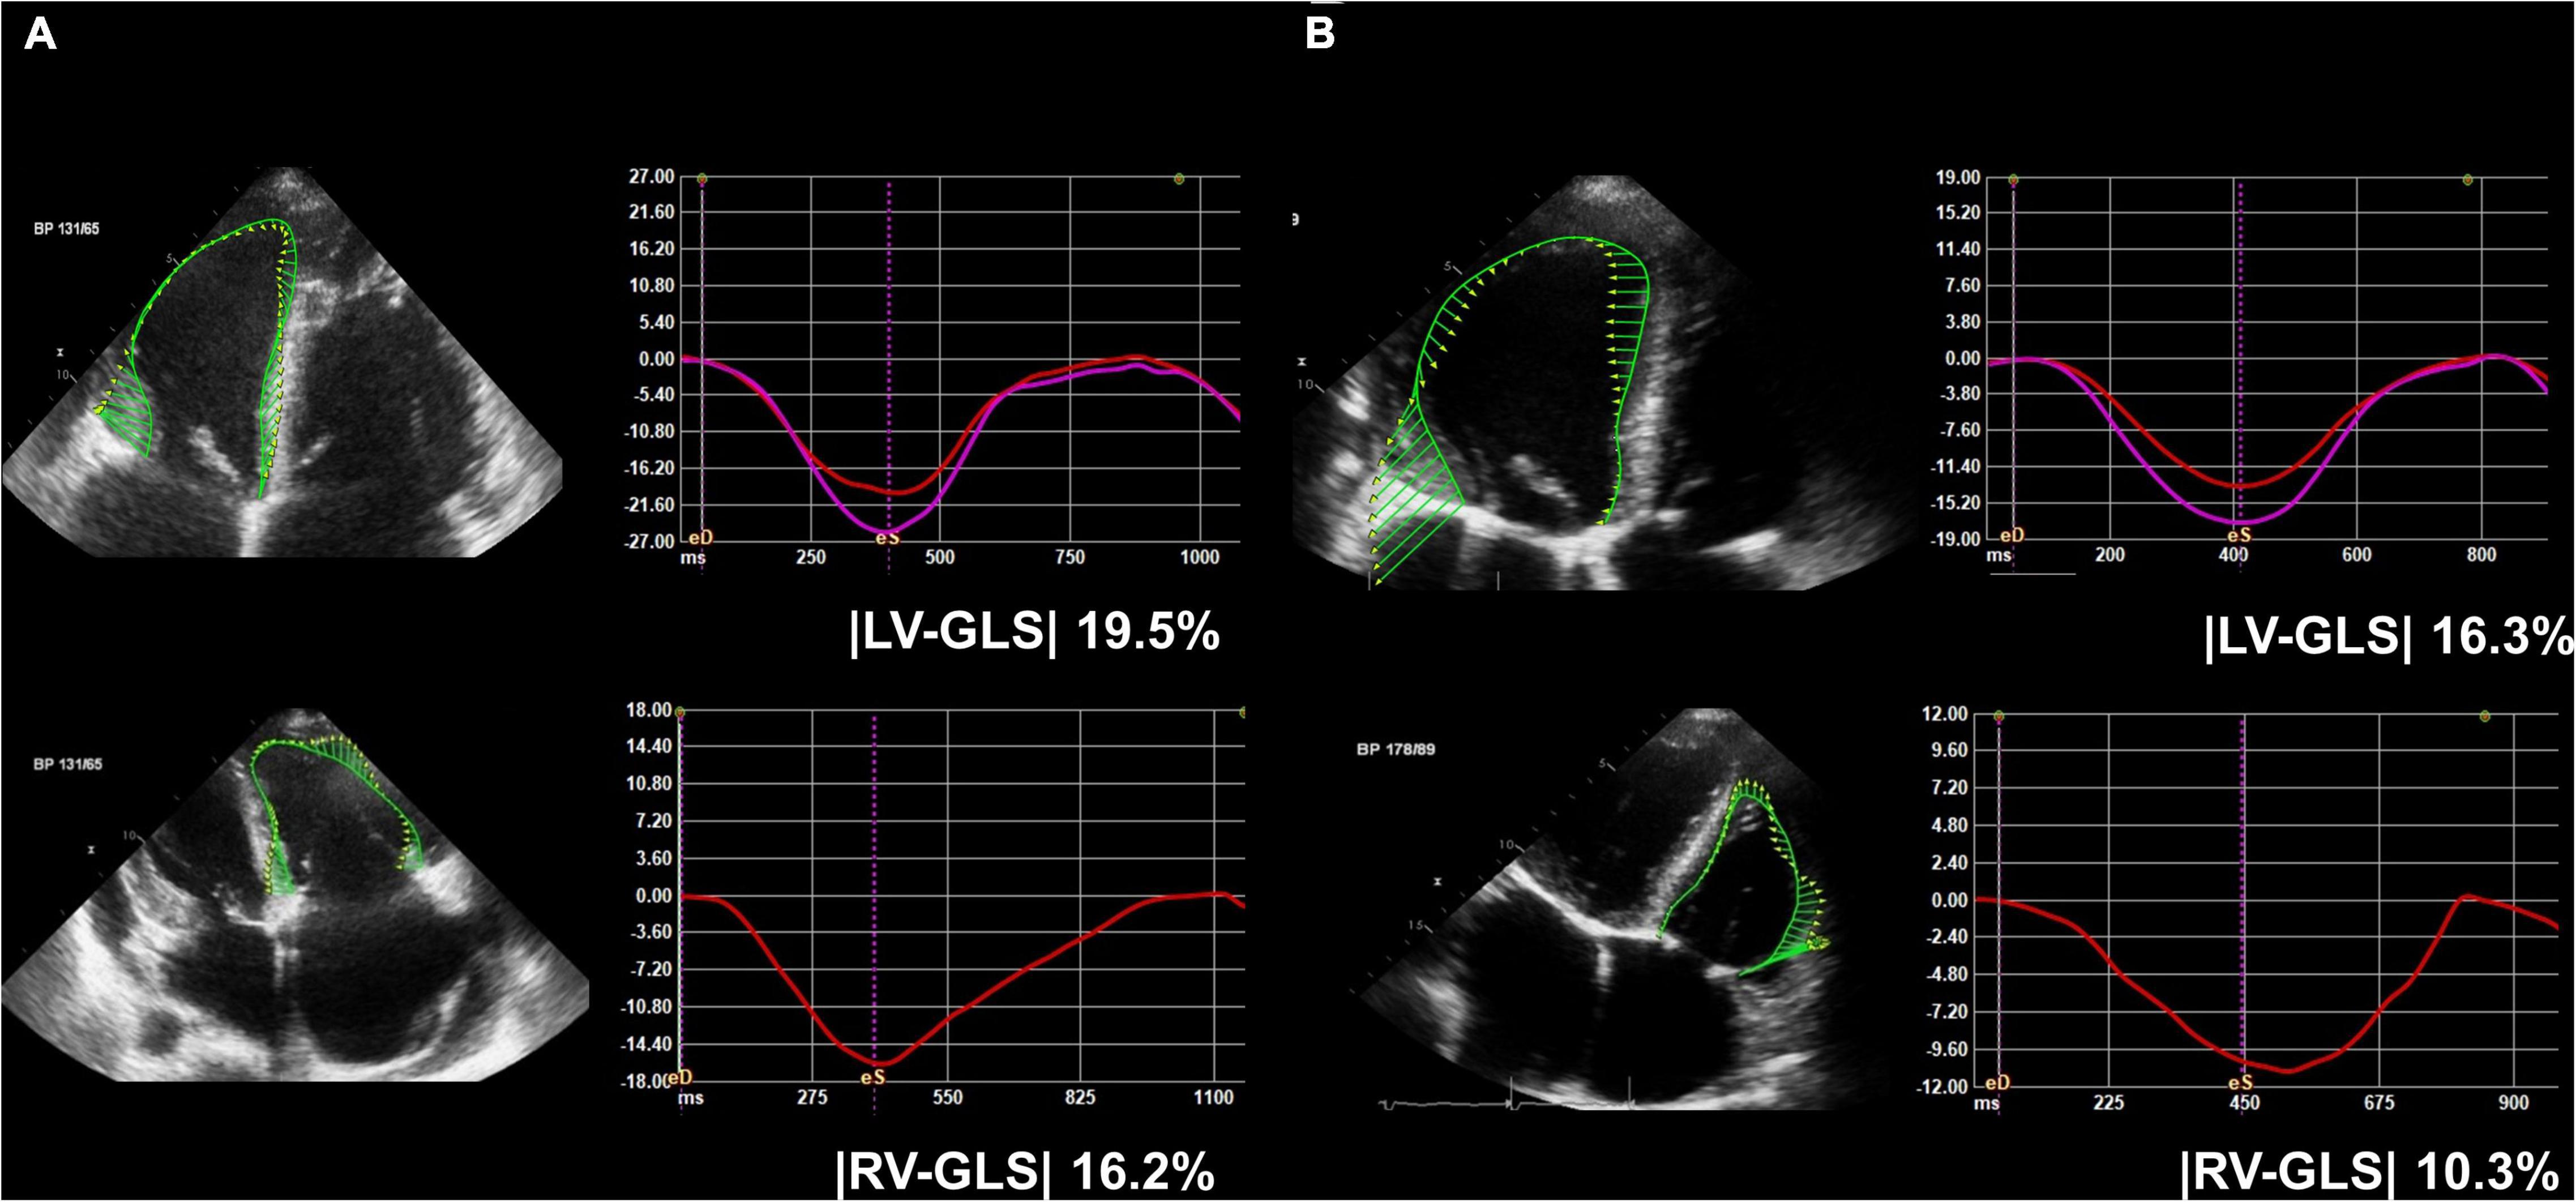 Braz J Cardiovasc Surg - Preoperative Left Ventricular Global Longitudinal  Strain Identifies Aortic Stenosis Patients with Improved Postoperative  Recovery of Left Ventricular Geometry: A Prospective Cohort Study